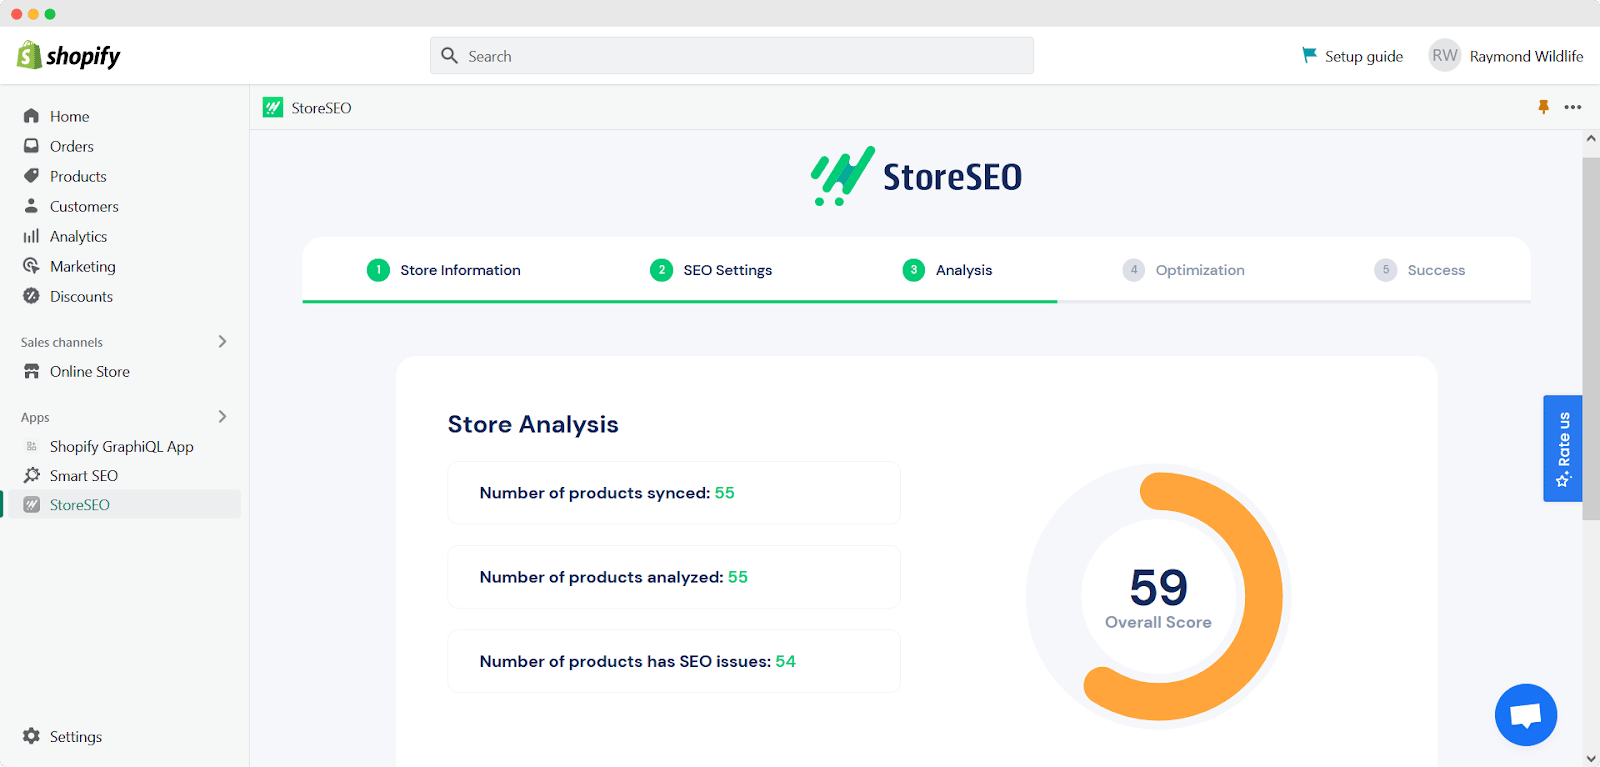 Migrate To StoreSEO